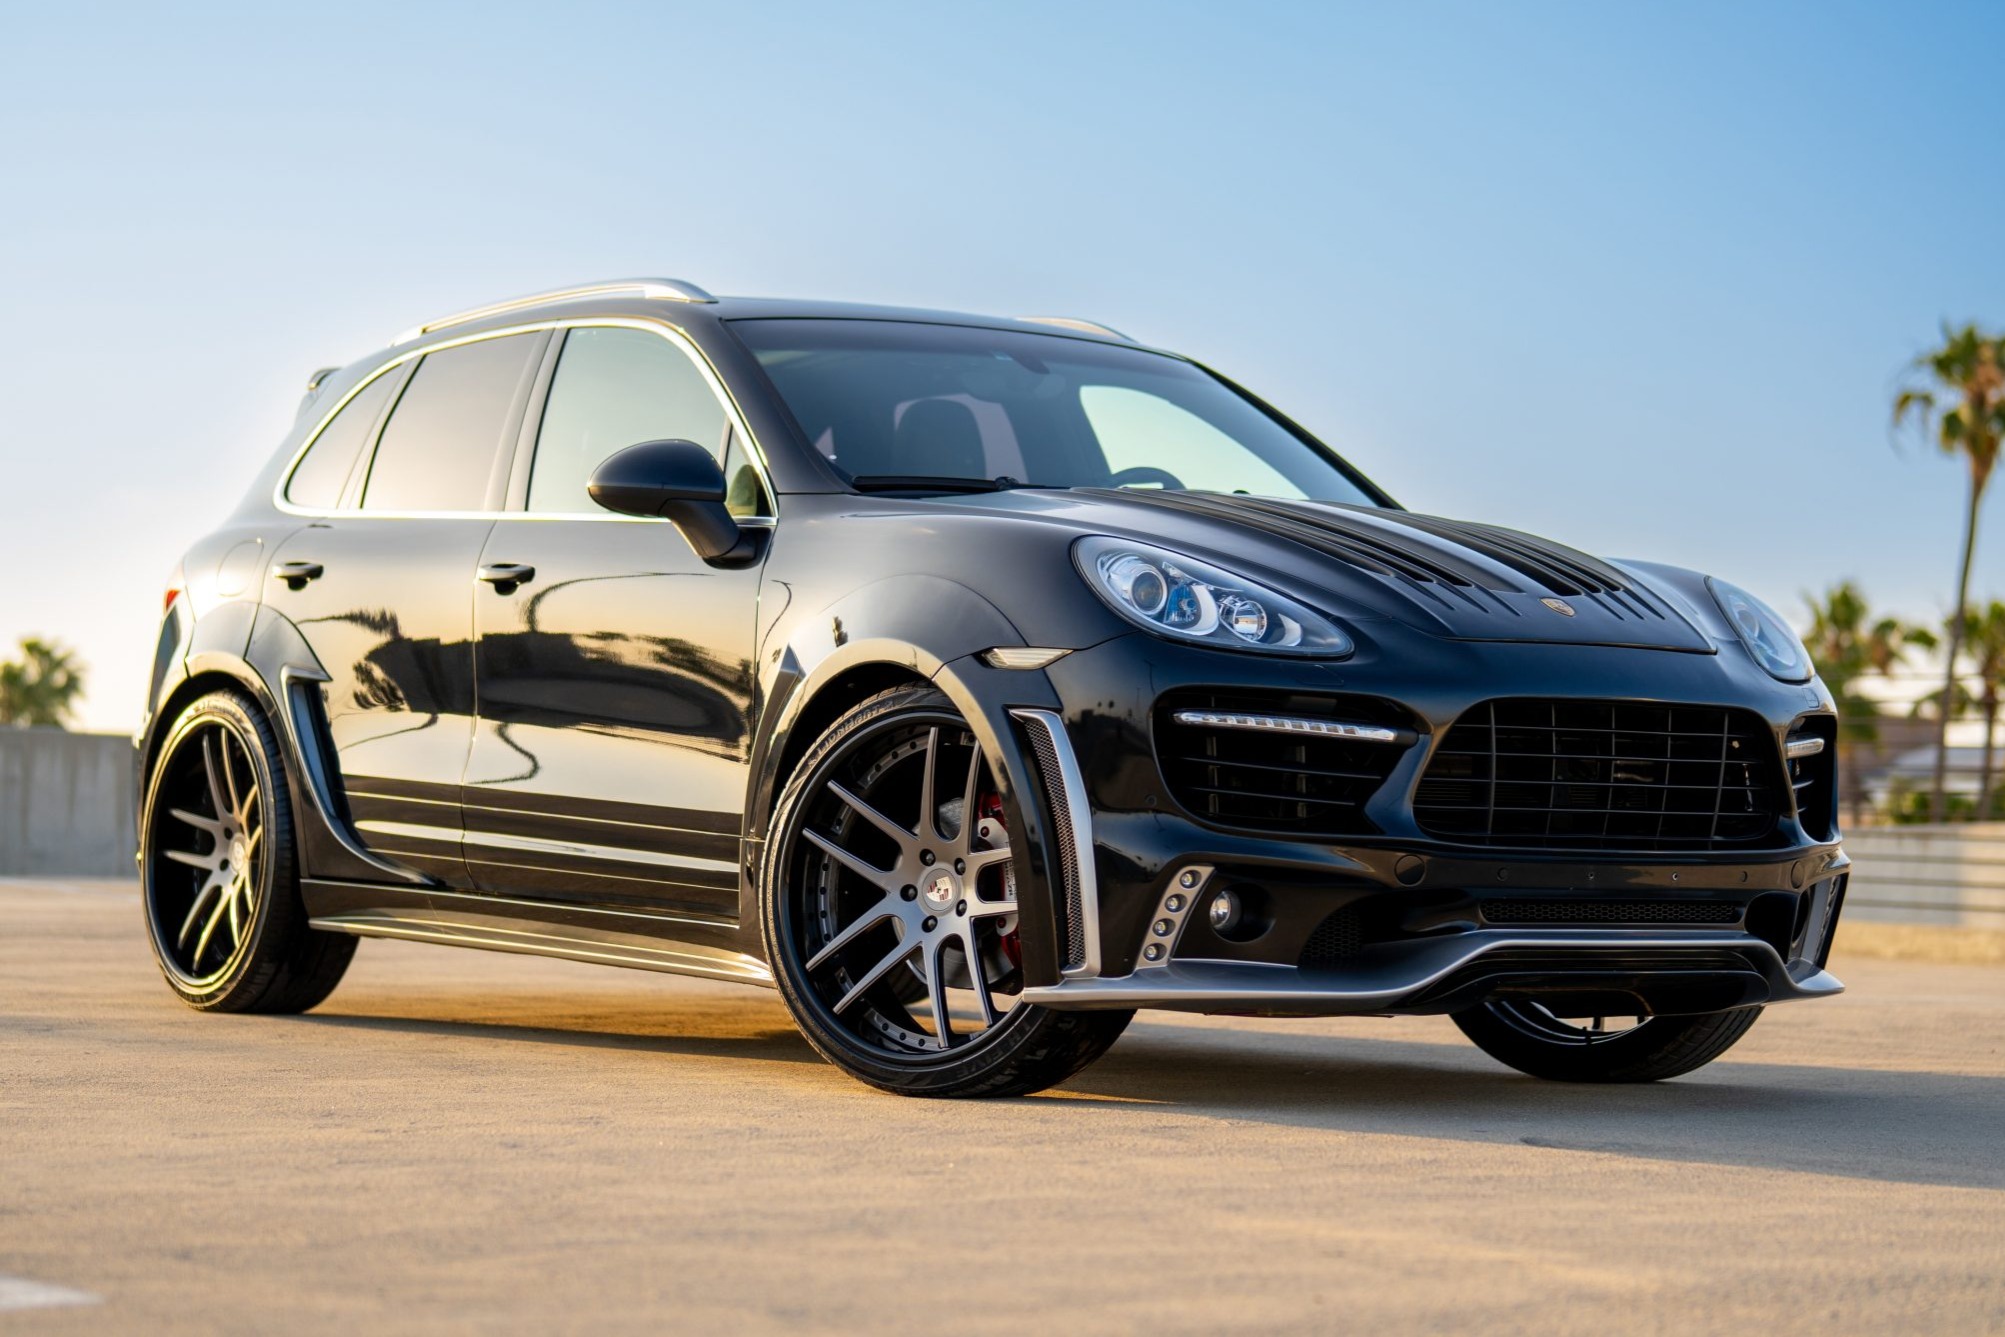 Used Modified 2013 Porsche Cayenne S Review